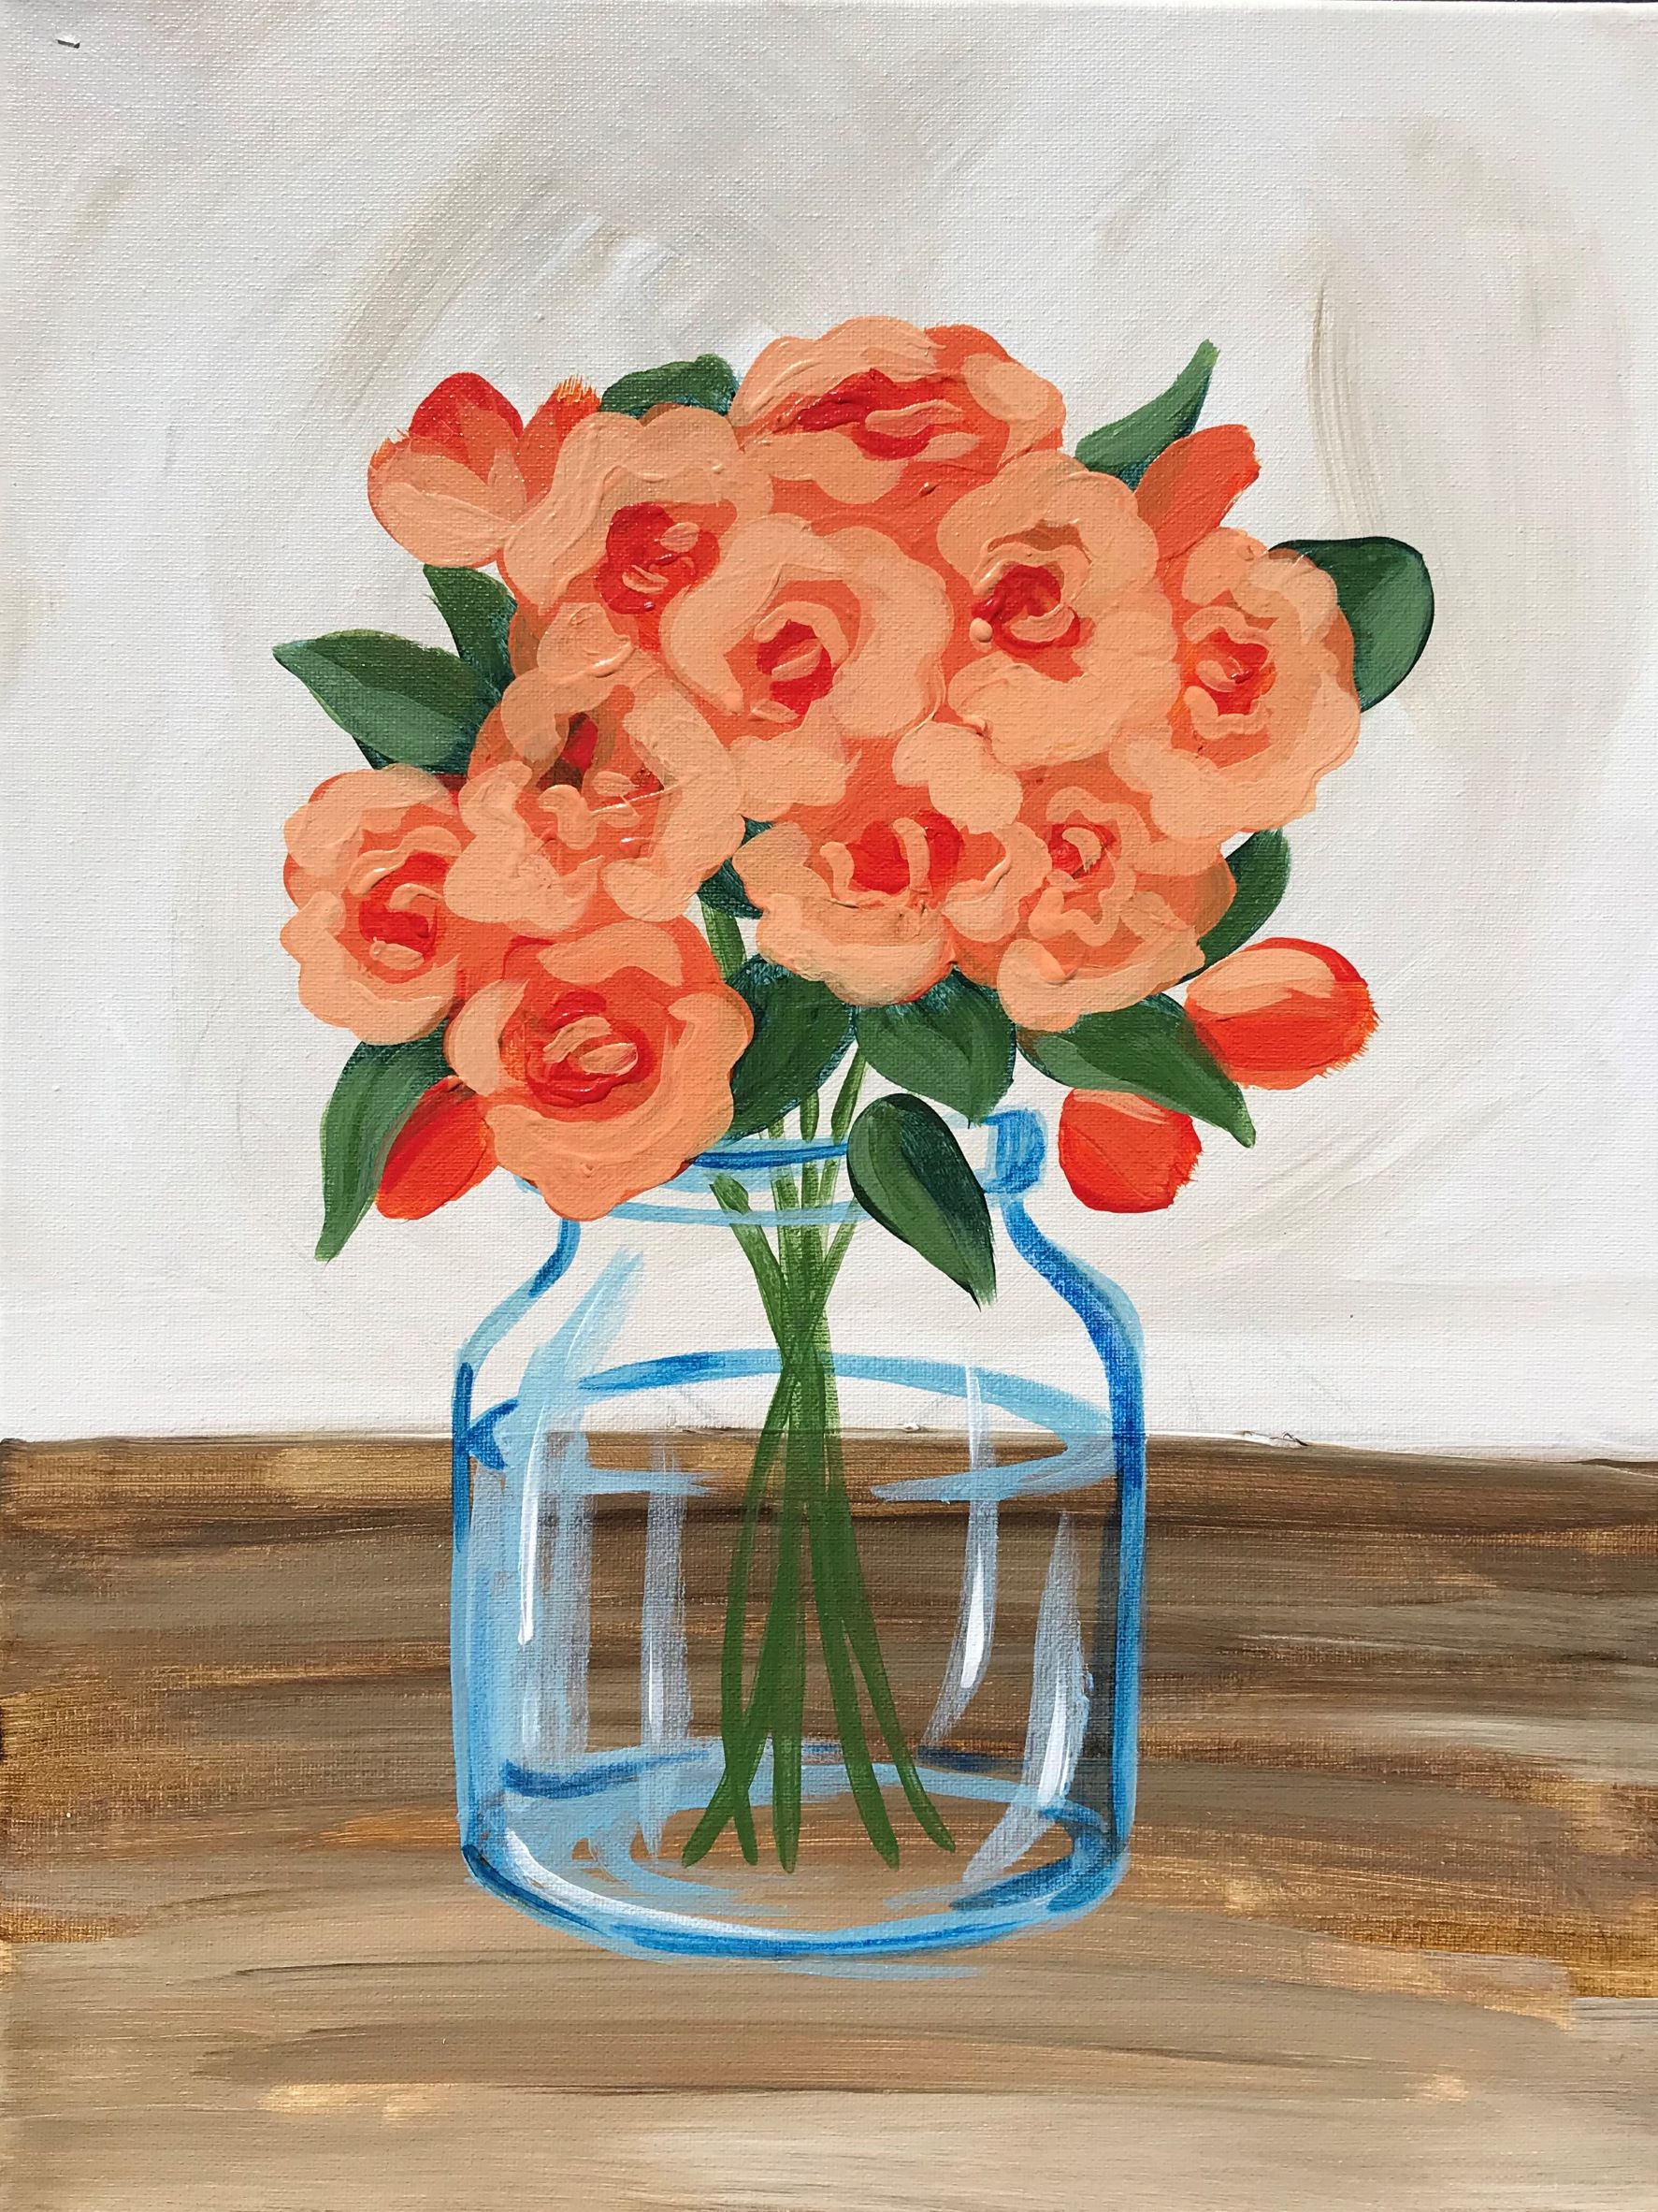 An image of a painting of flowers in a vase.